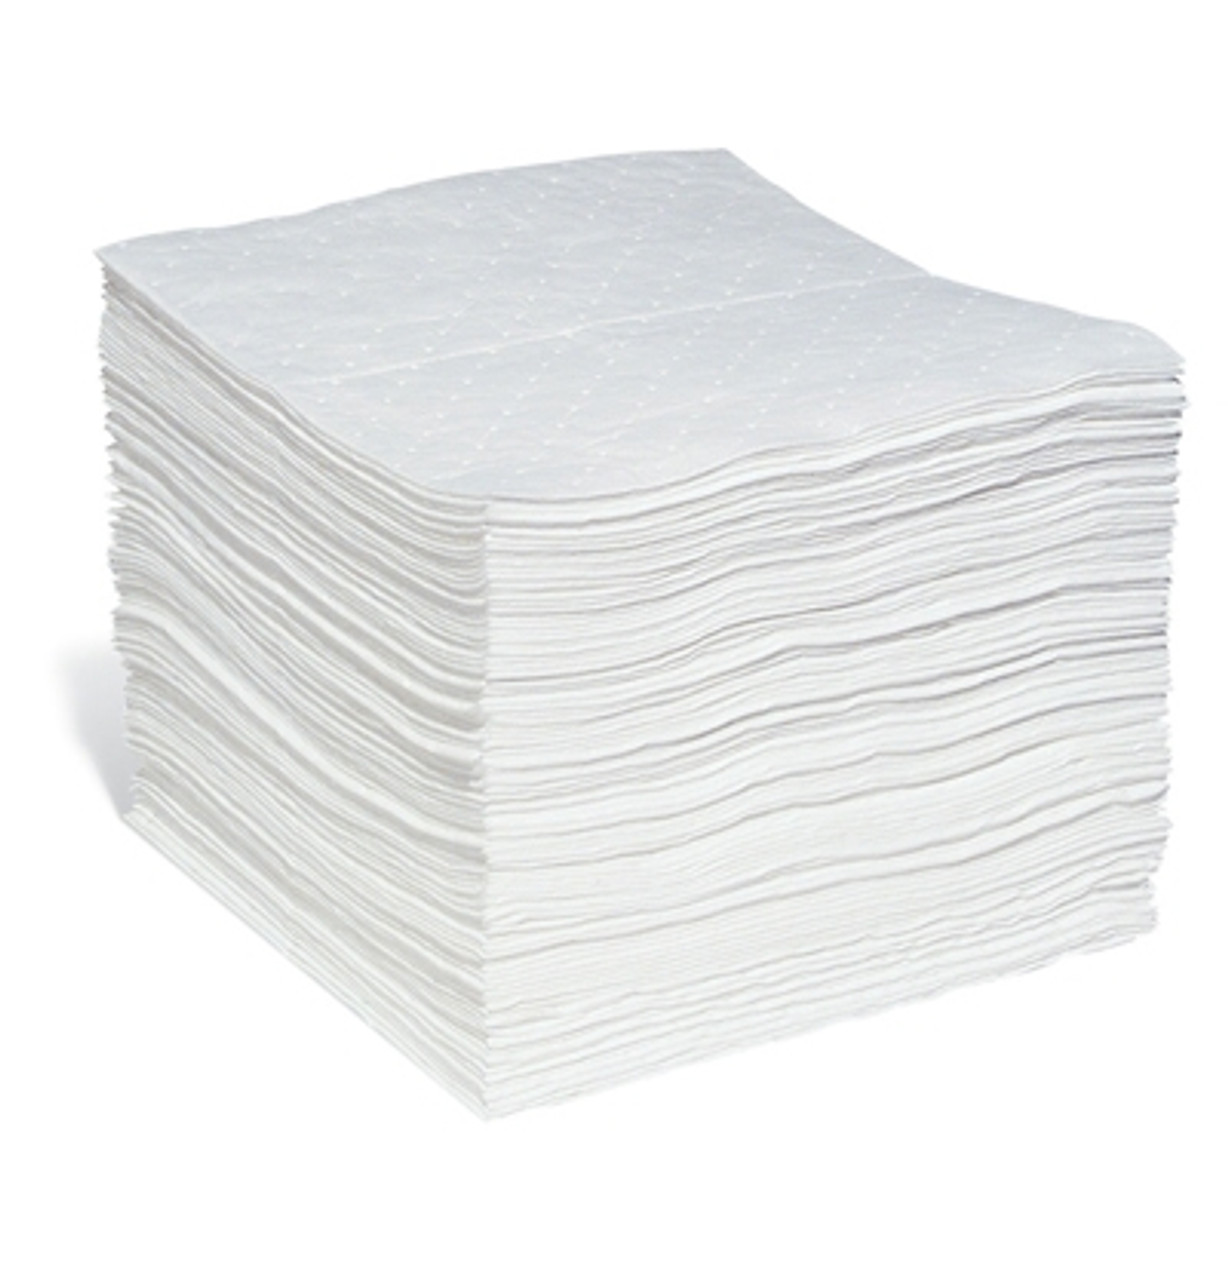 Oil Absorbent Sheets